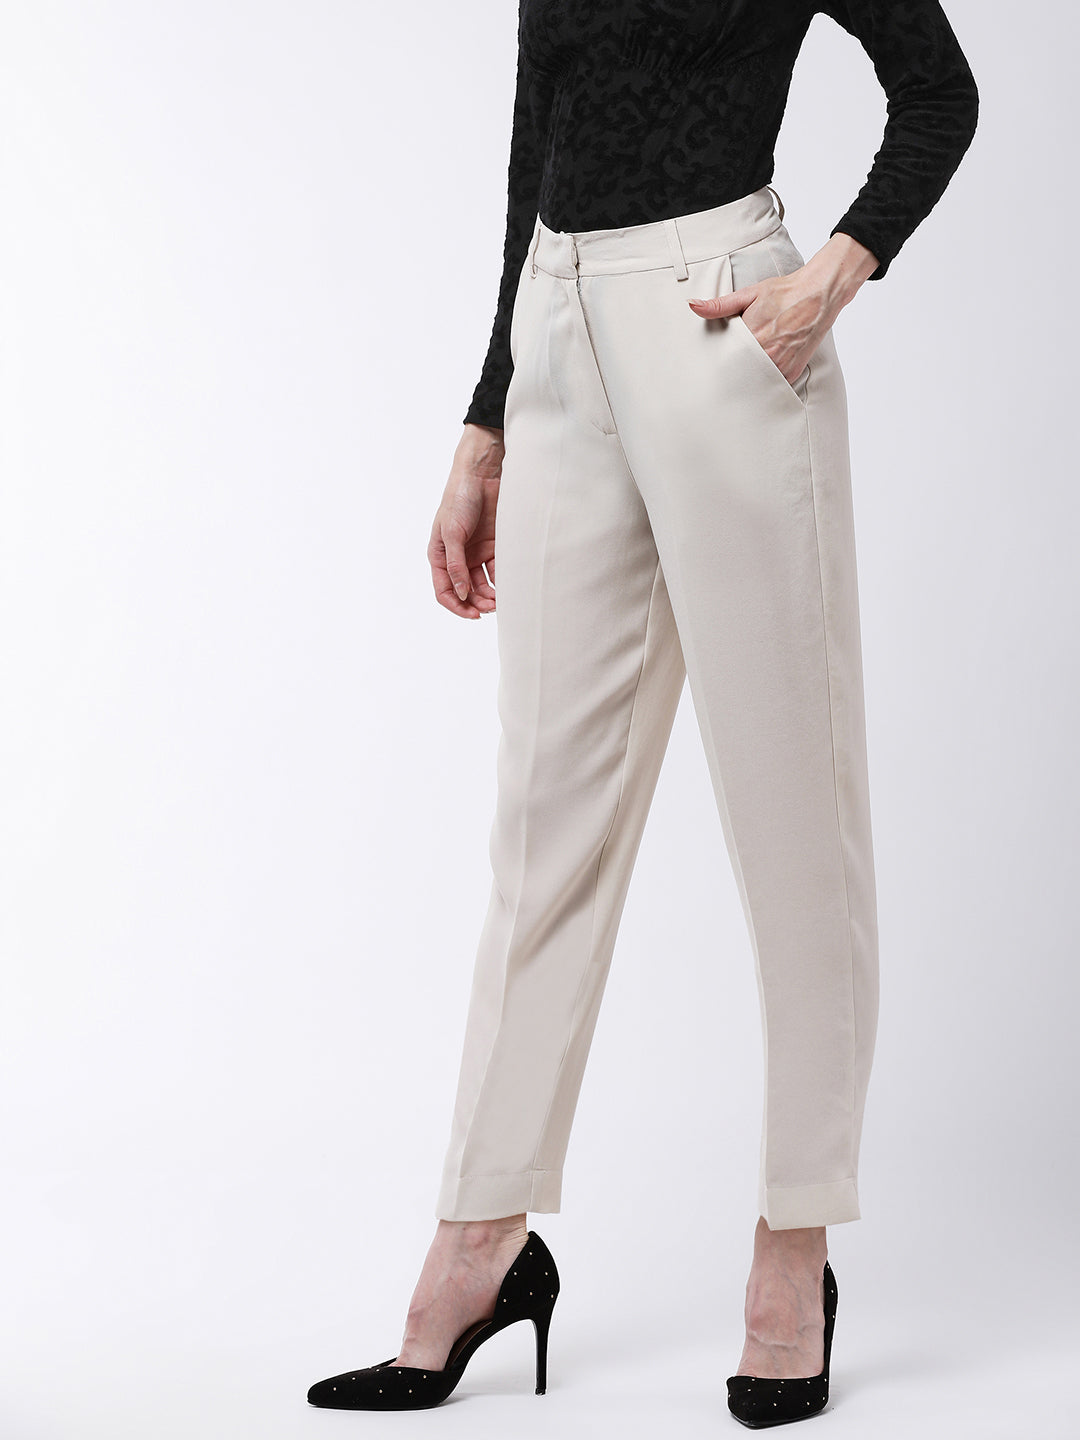 Buy Off white Trousers  Pants for Women by Readiprint Fashions Online   Ajiocom